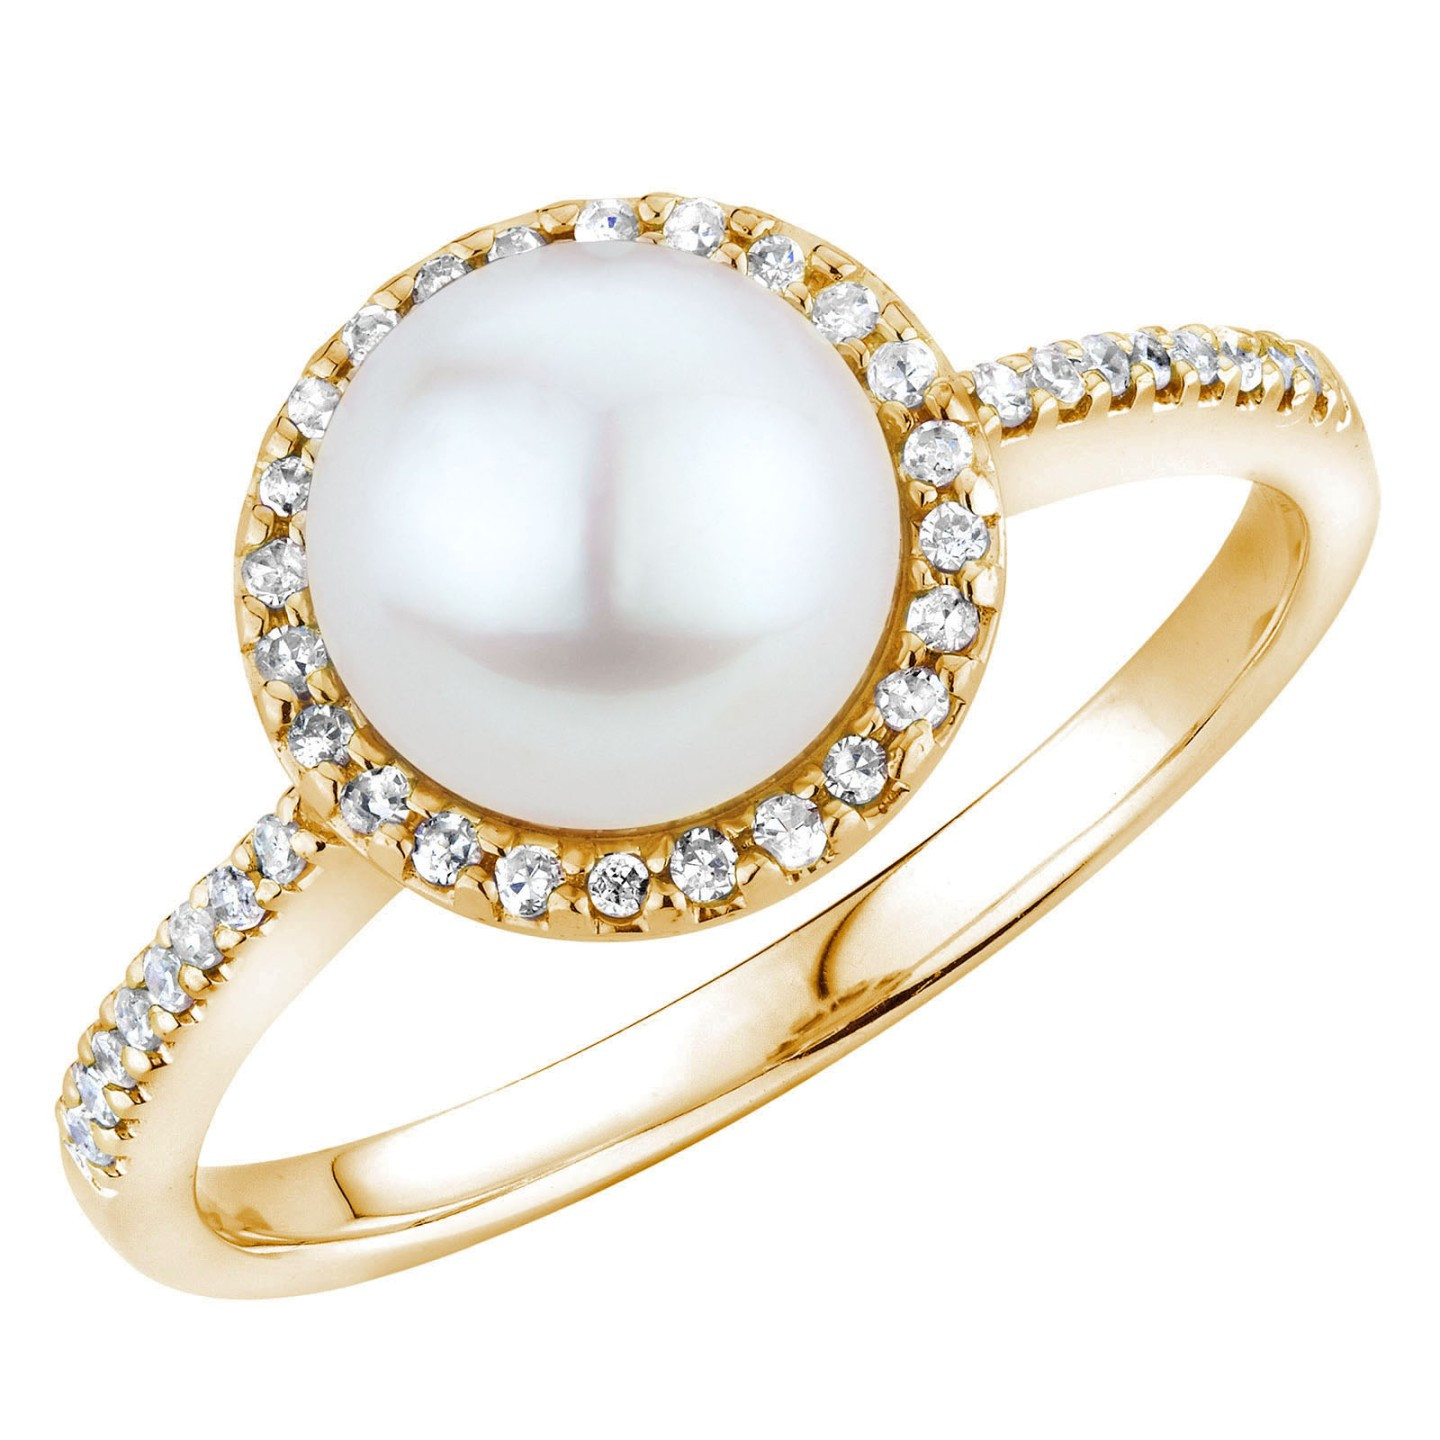 Round white Pearl Solitaire with Accents Ring in 14K Yellow Gold (MV3293)